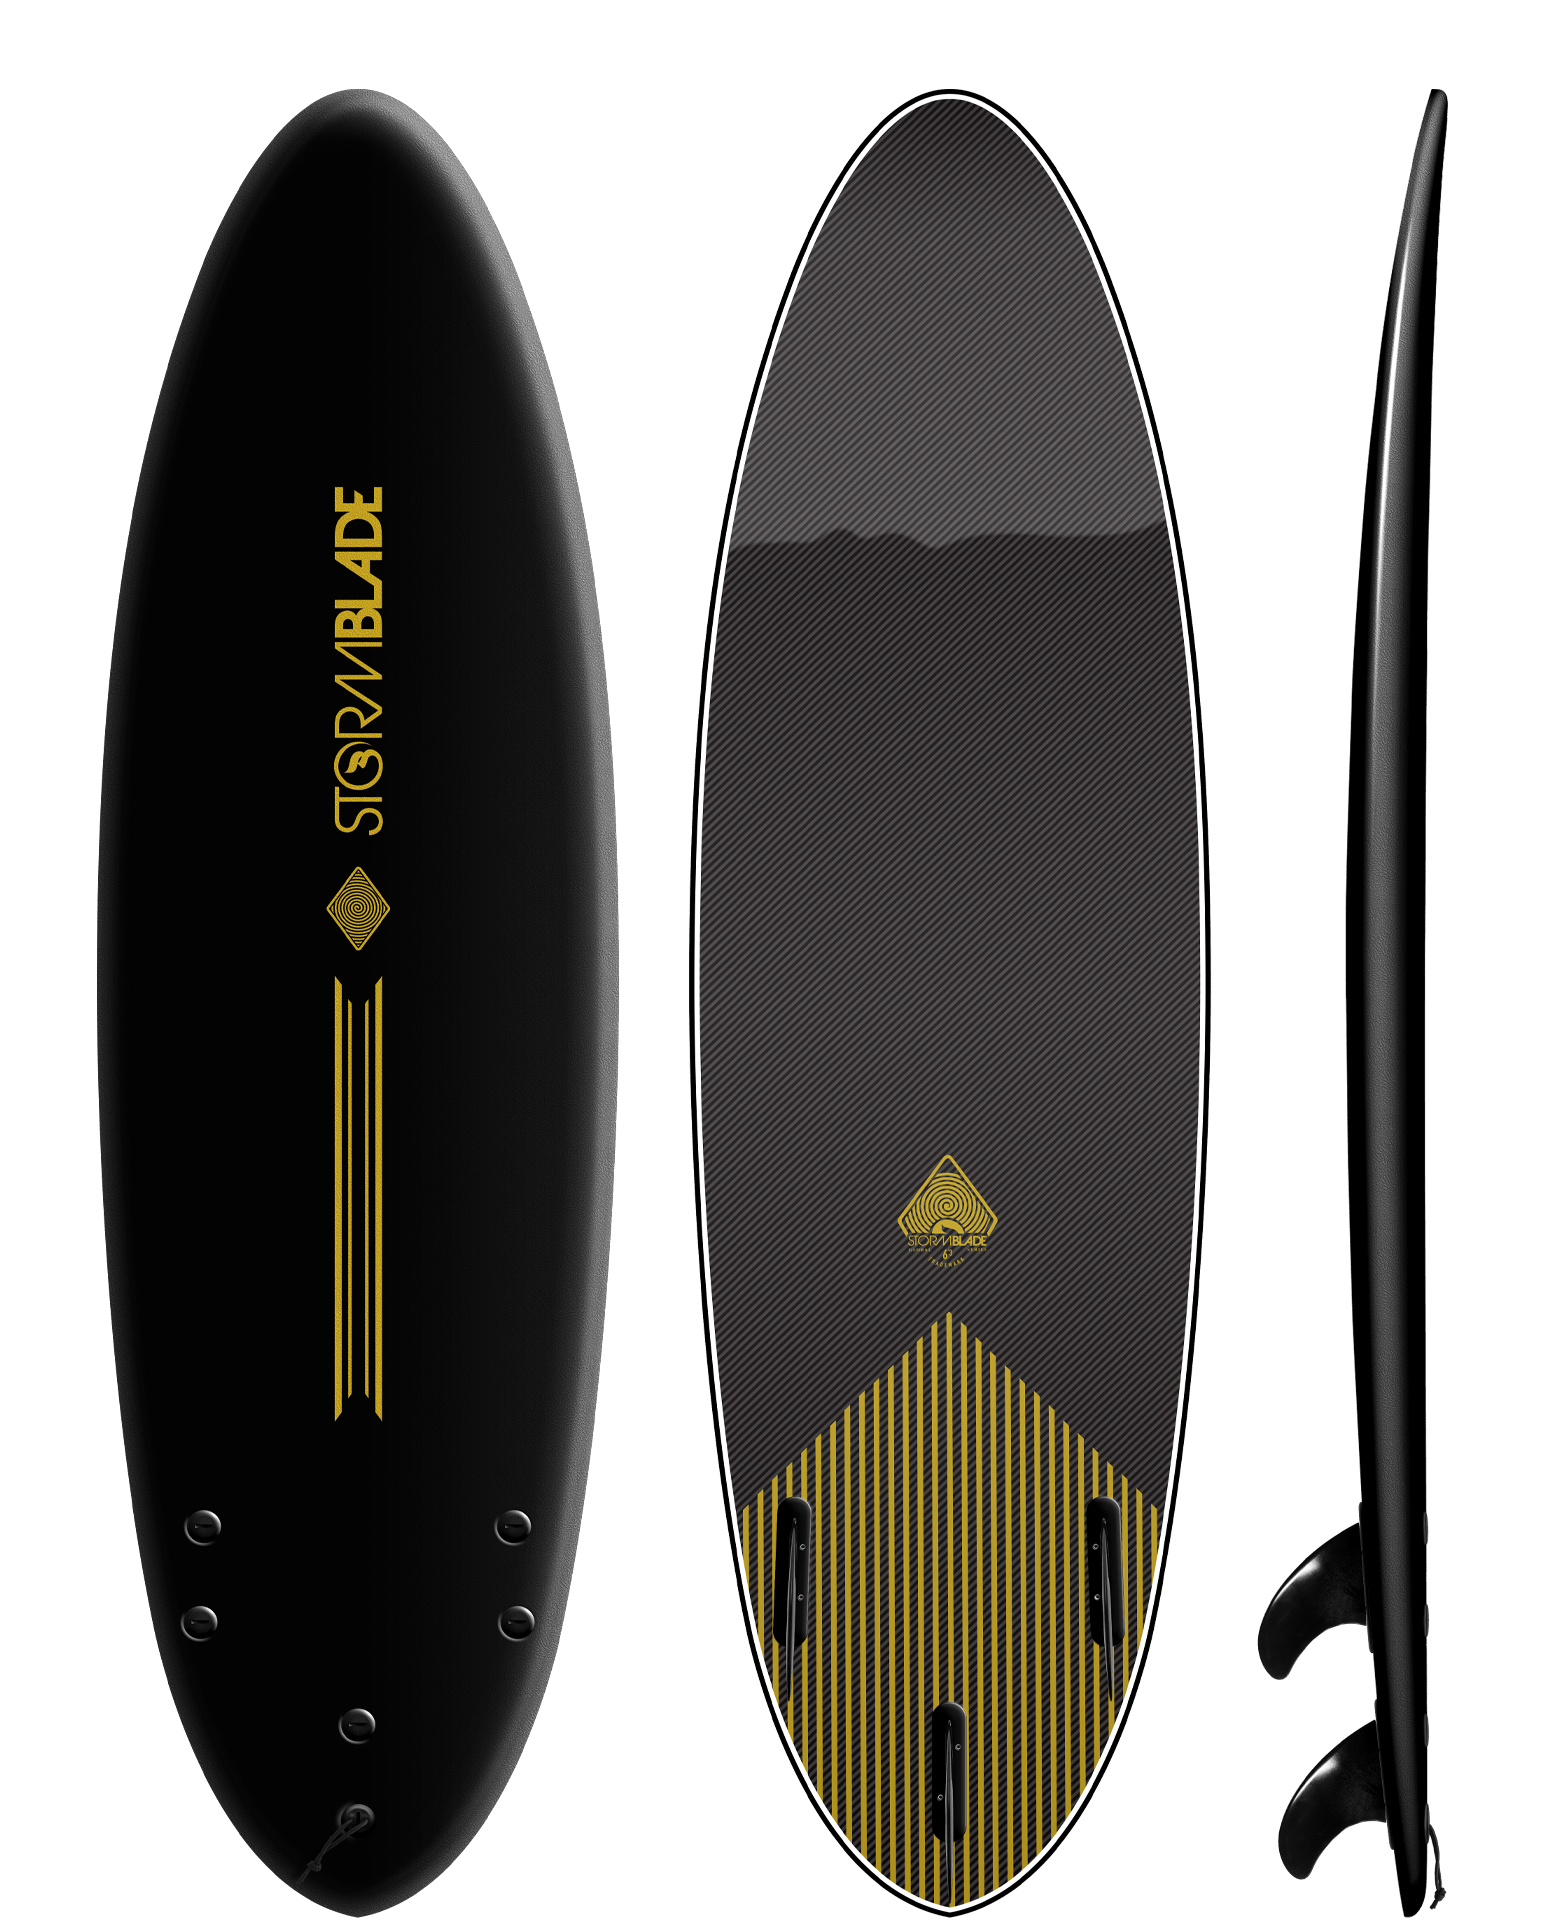 STORM BLADE SURFBOARDS JAPAN | 6ft4 ROUND TAIL SURFBOARDS